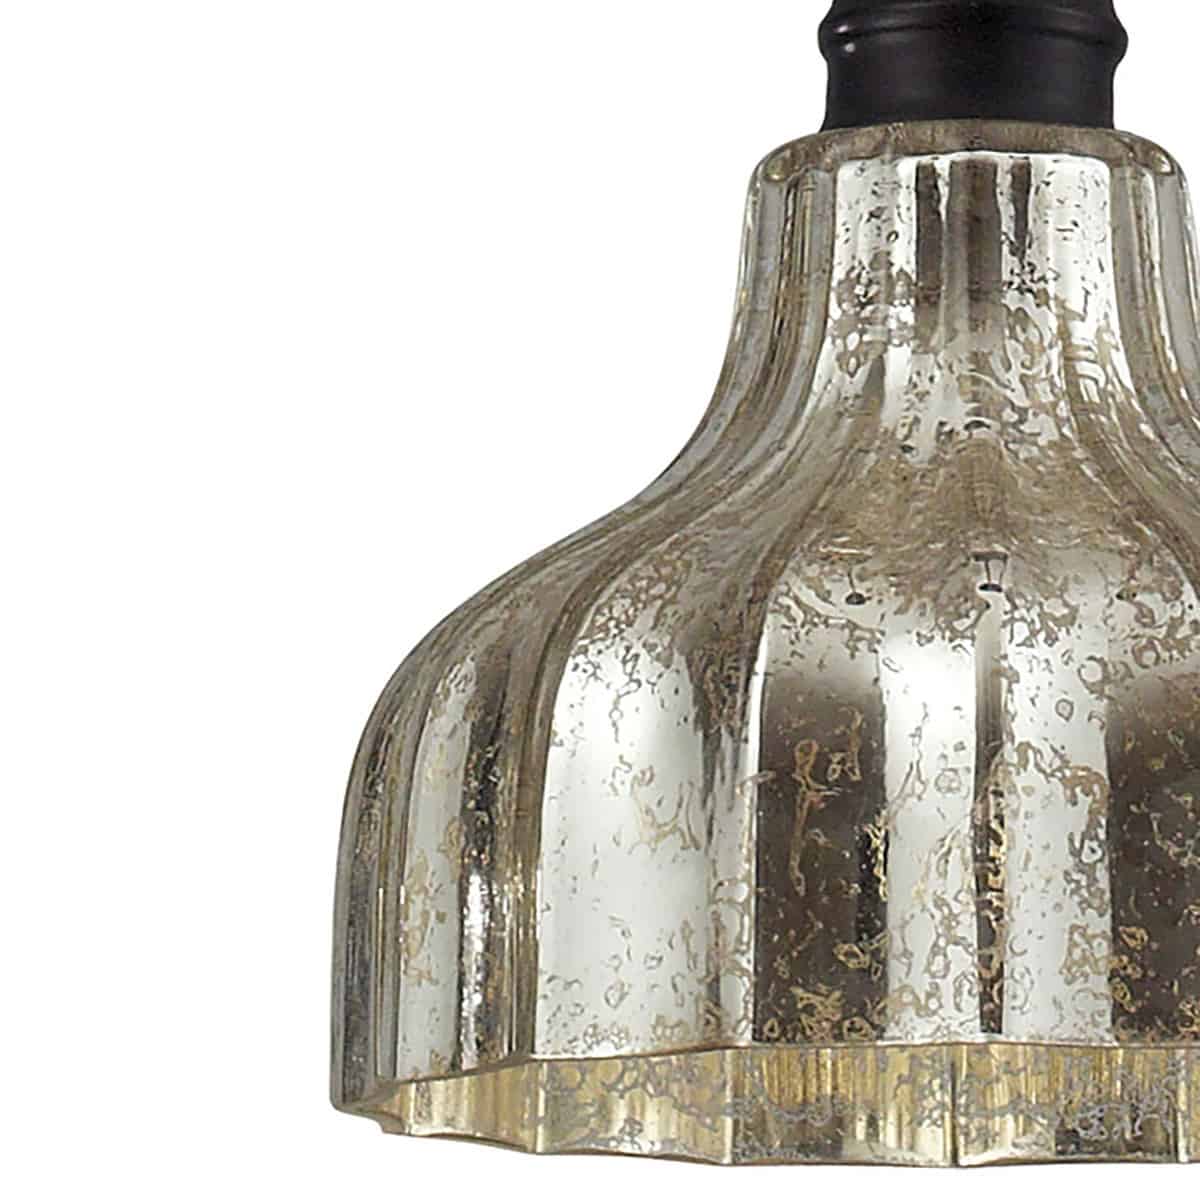 Danica 1 Light Pendant In Oil Rubbed Bronze And Mercury Glass By Elk Lighting On Sale Now